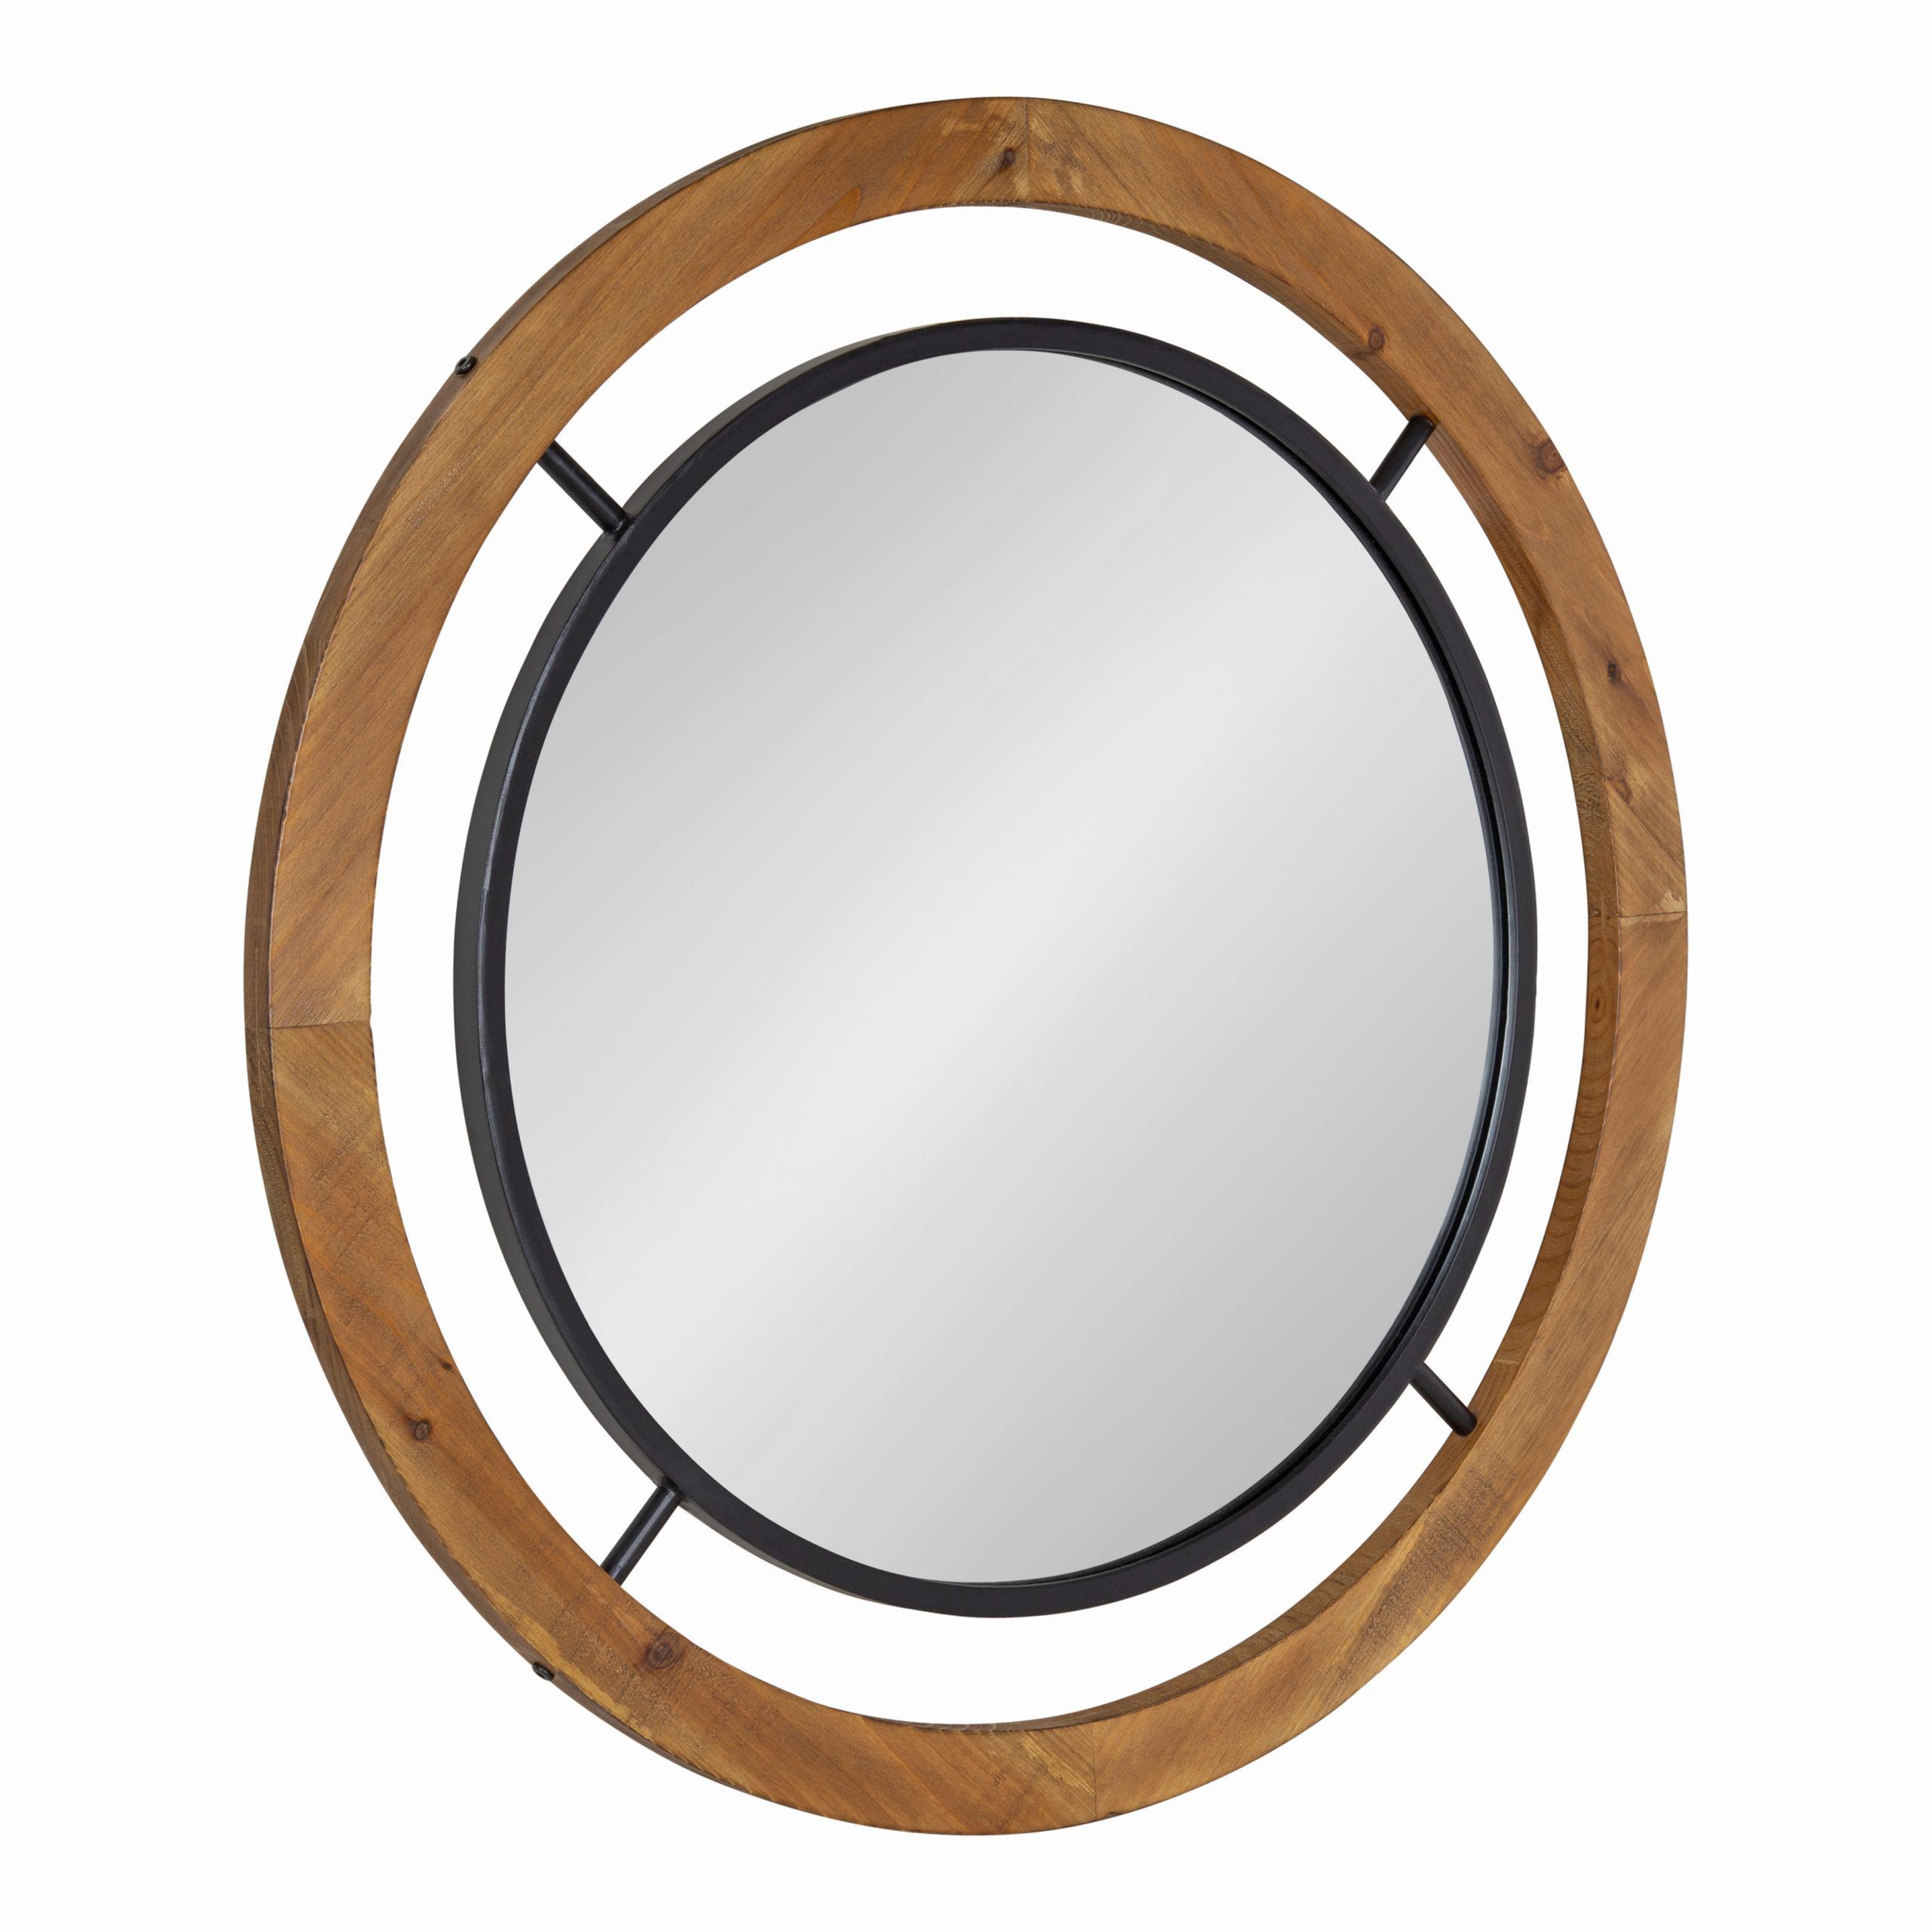 Kate And Laurel Whalen Rustic Wood Wall Mirror, 32" X 32", Brown Throughout Mocha Brown Wall Mirrors (View 2 of 15)